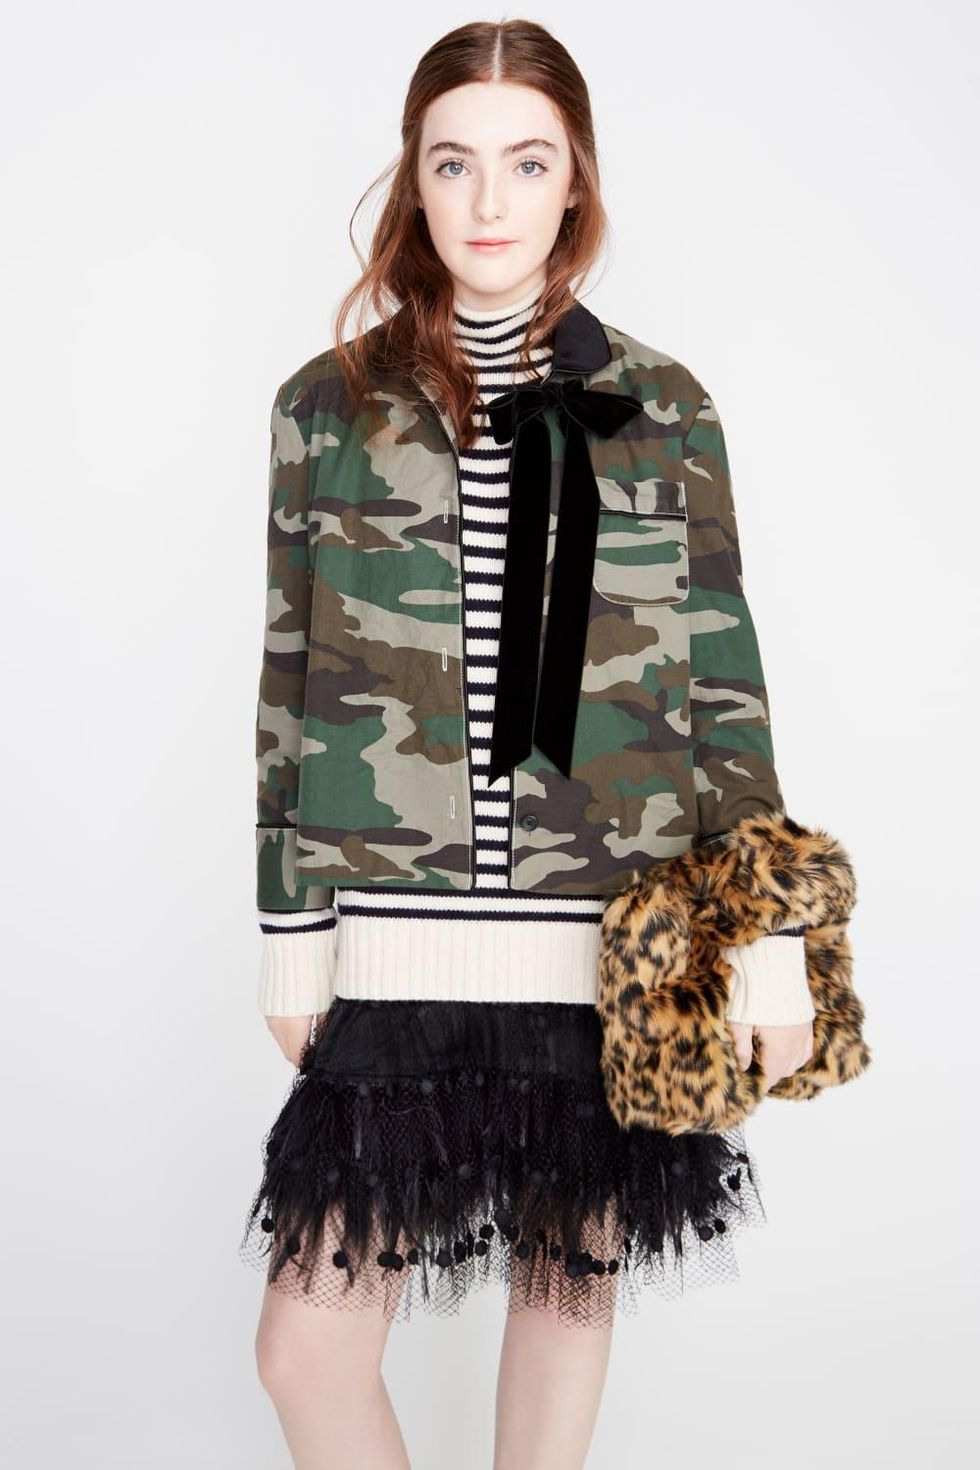 Julianne Moore daughter Liv Freundlich modeling J.Crew fall collection